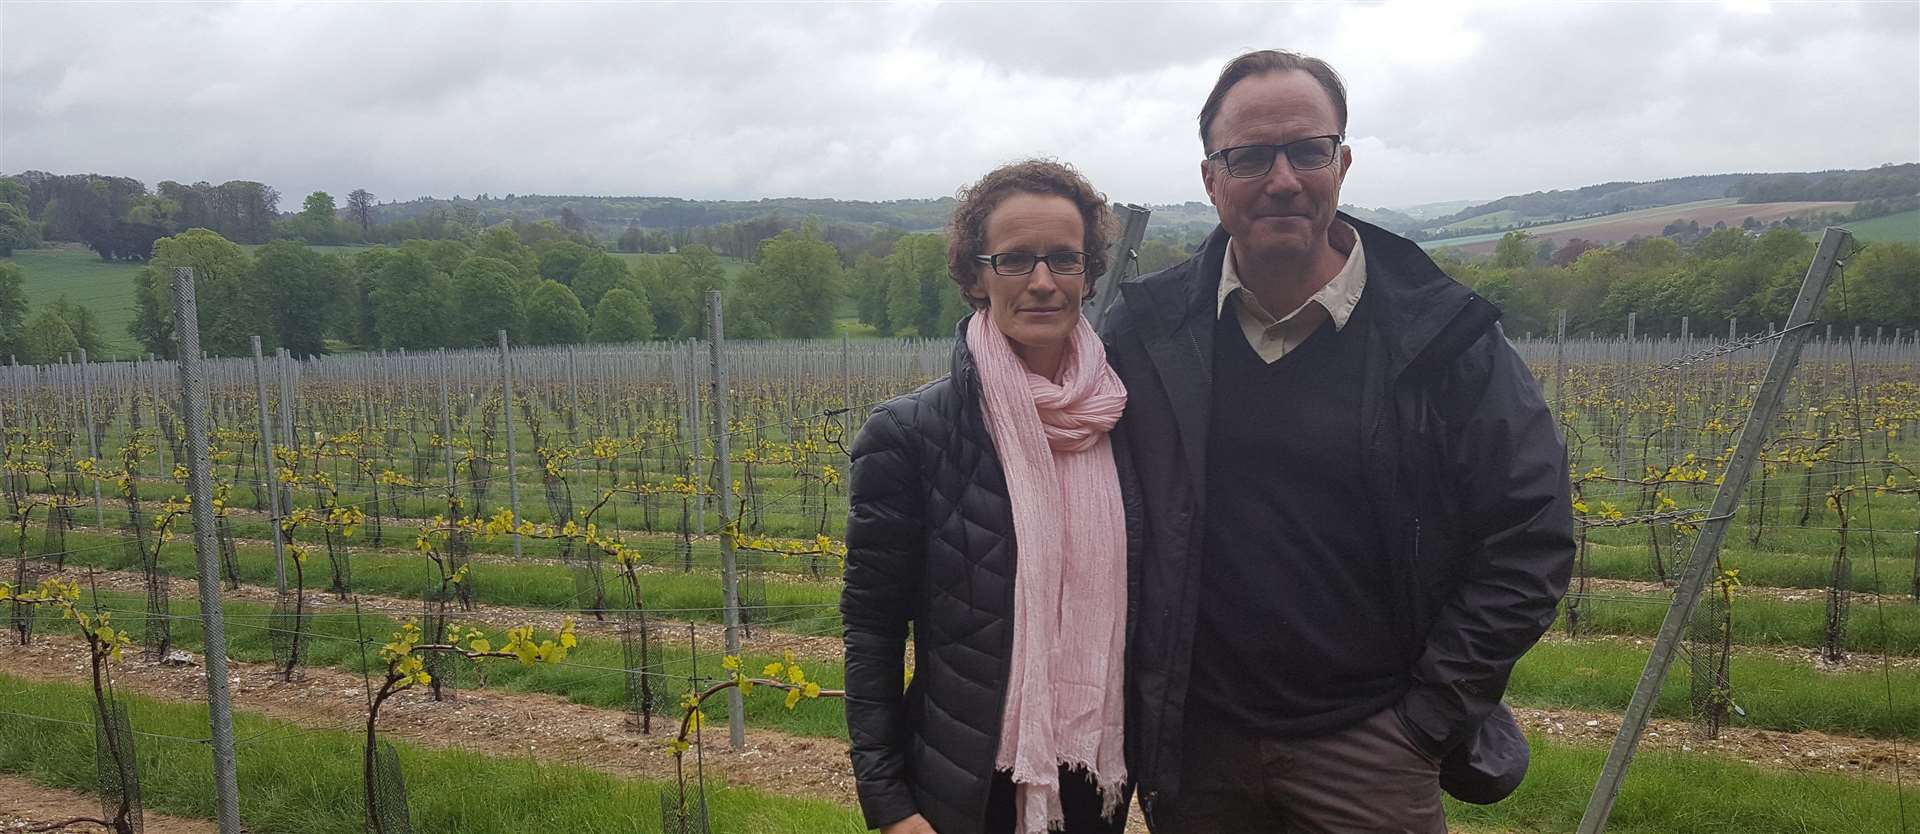 Simpsons Wine Estate owners Charles and Ruth Simpson